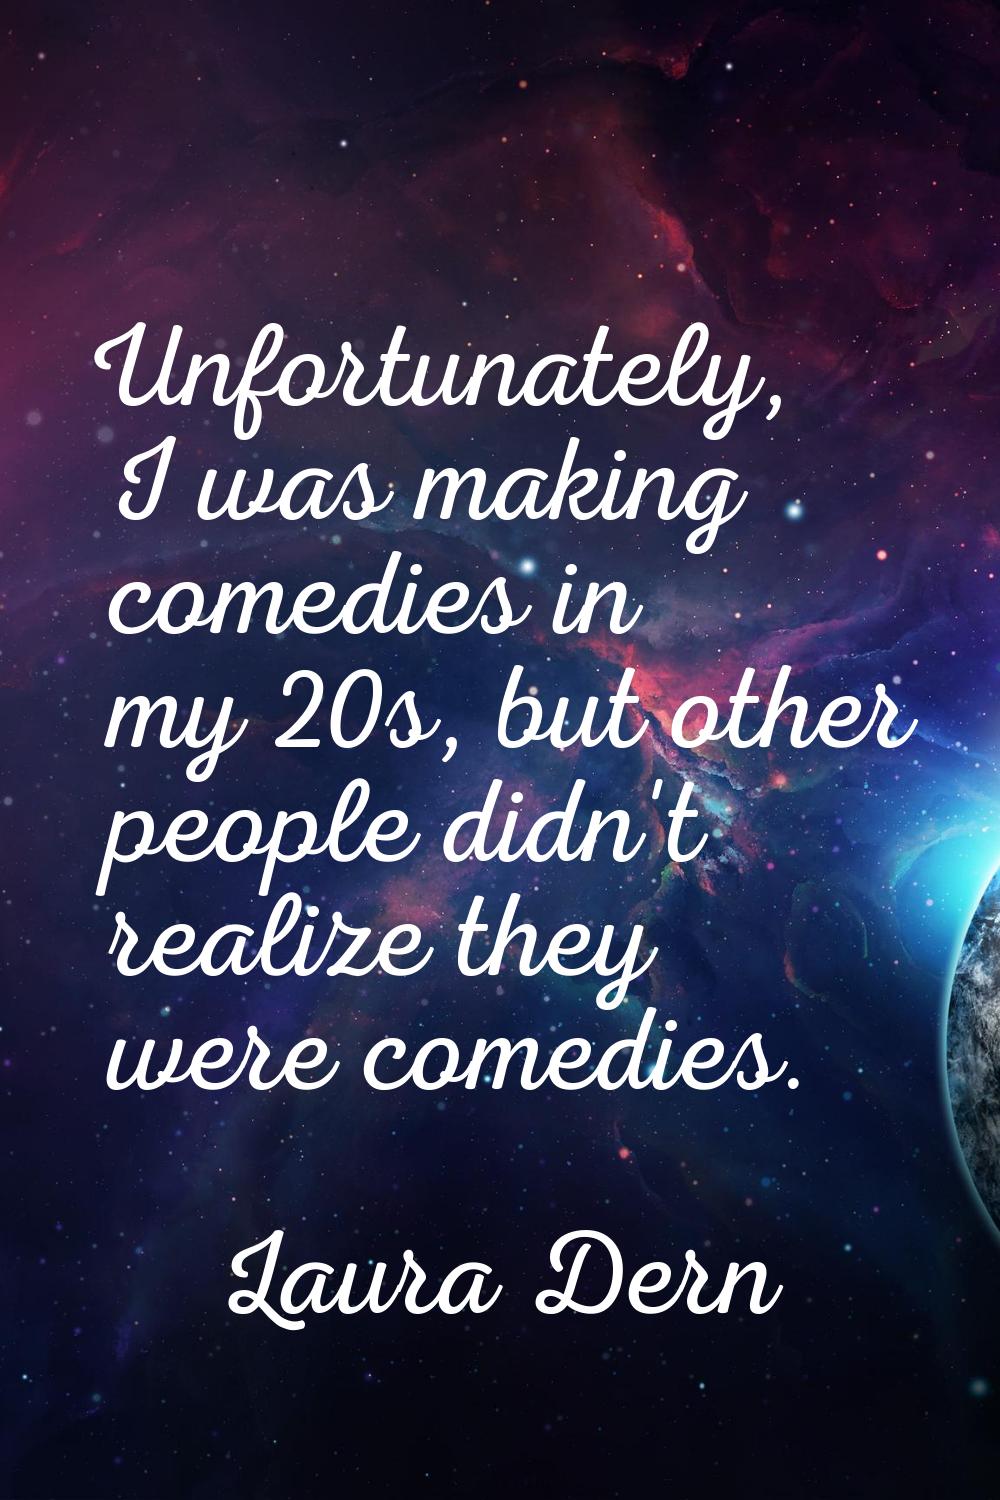 Unfortunately, I was making comedies in my 20s, but other people didn't realize they were comedies.